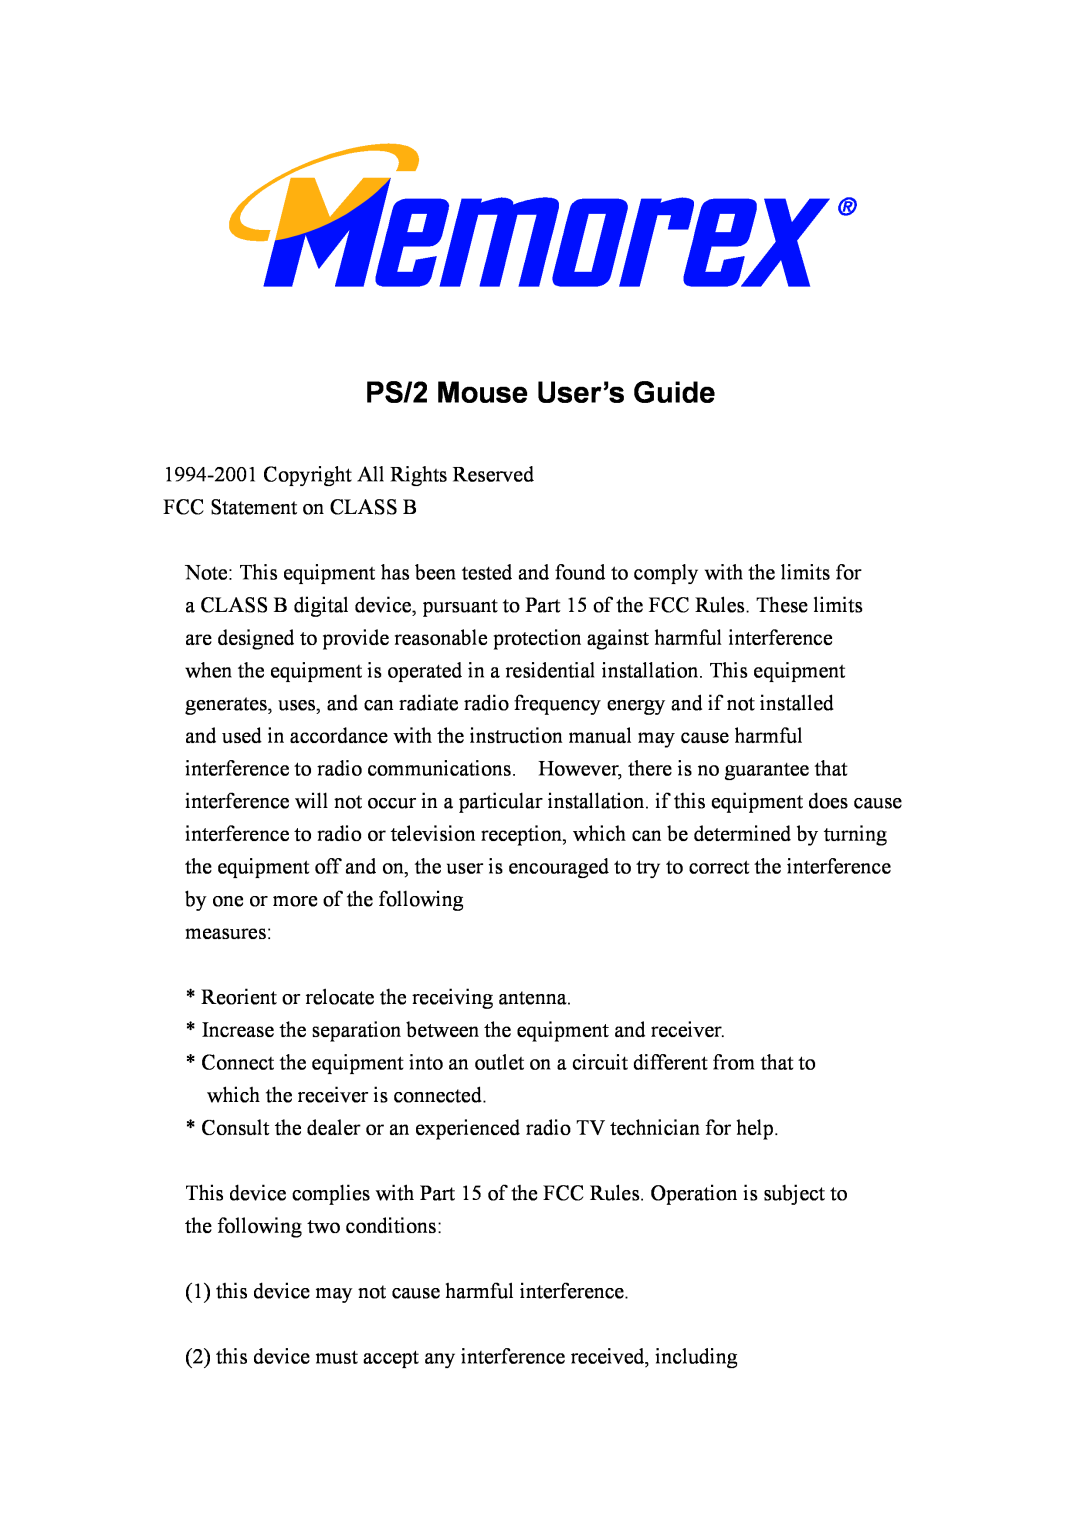 Memorex instruction manual PS/2 Mouse User’s Guide 